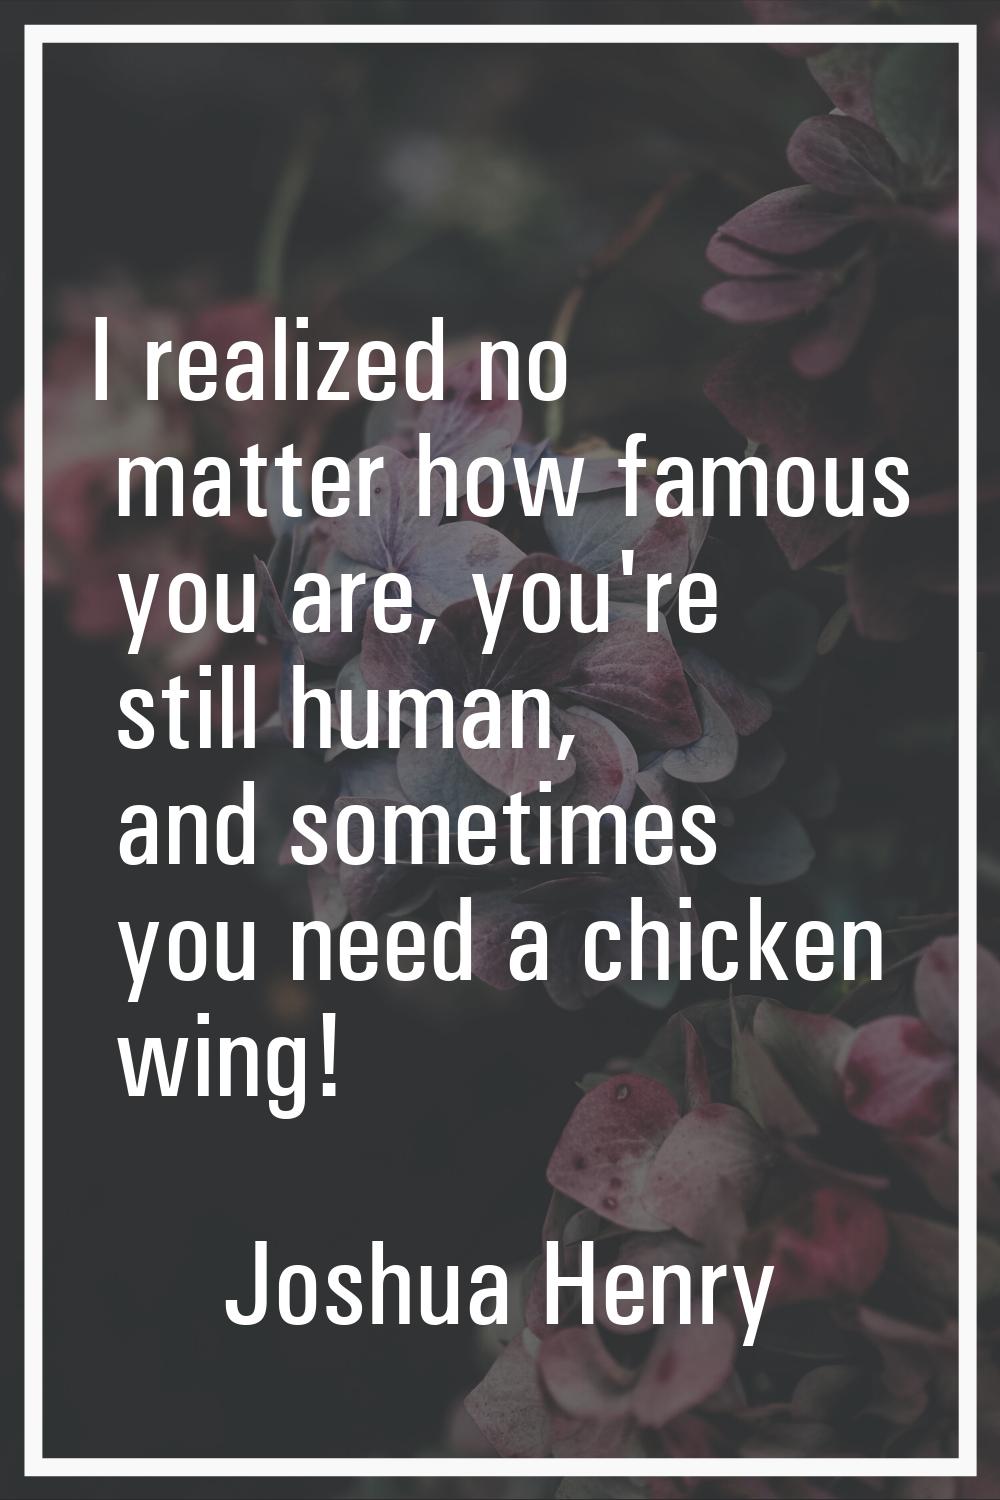 I realized no matter how famous you are, you're still human, and sometimes you need a chicken wing!